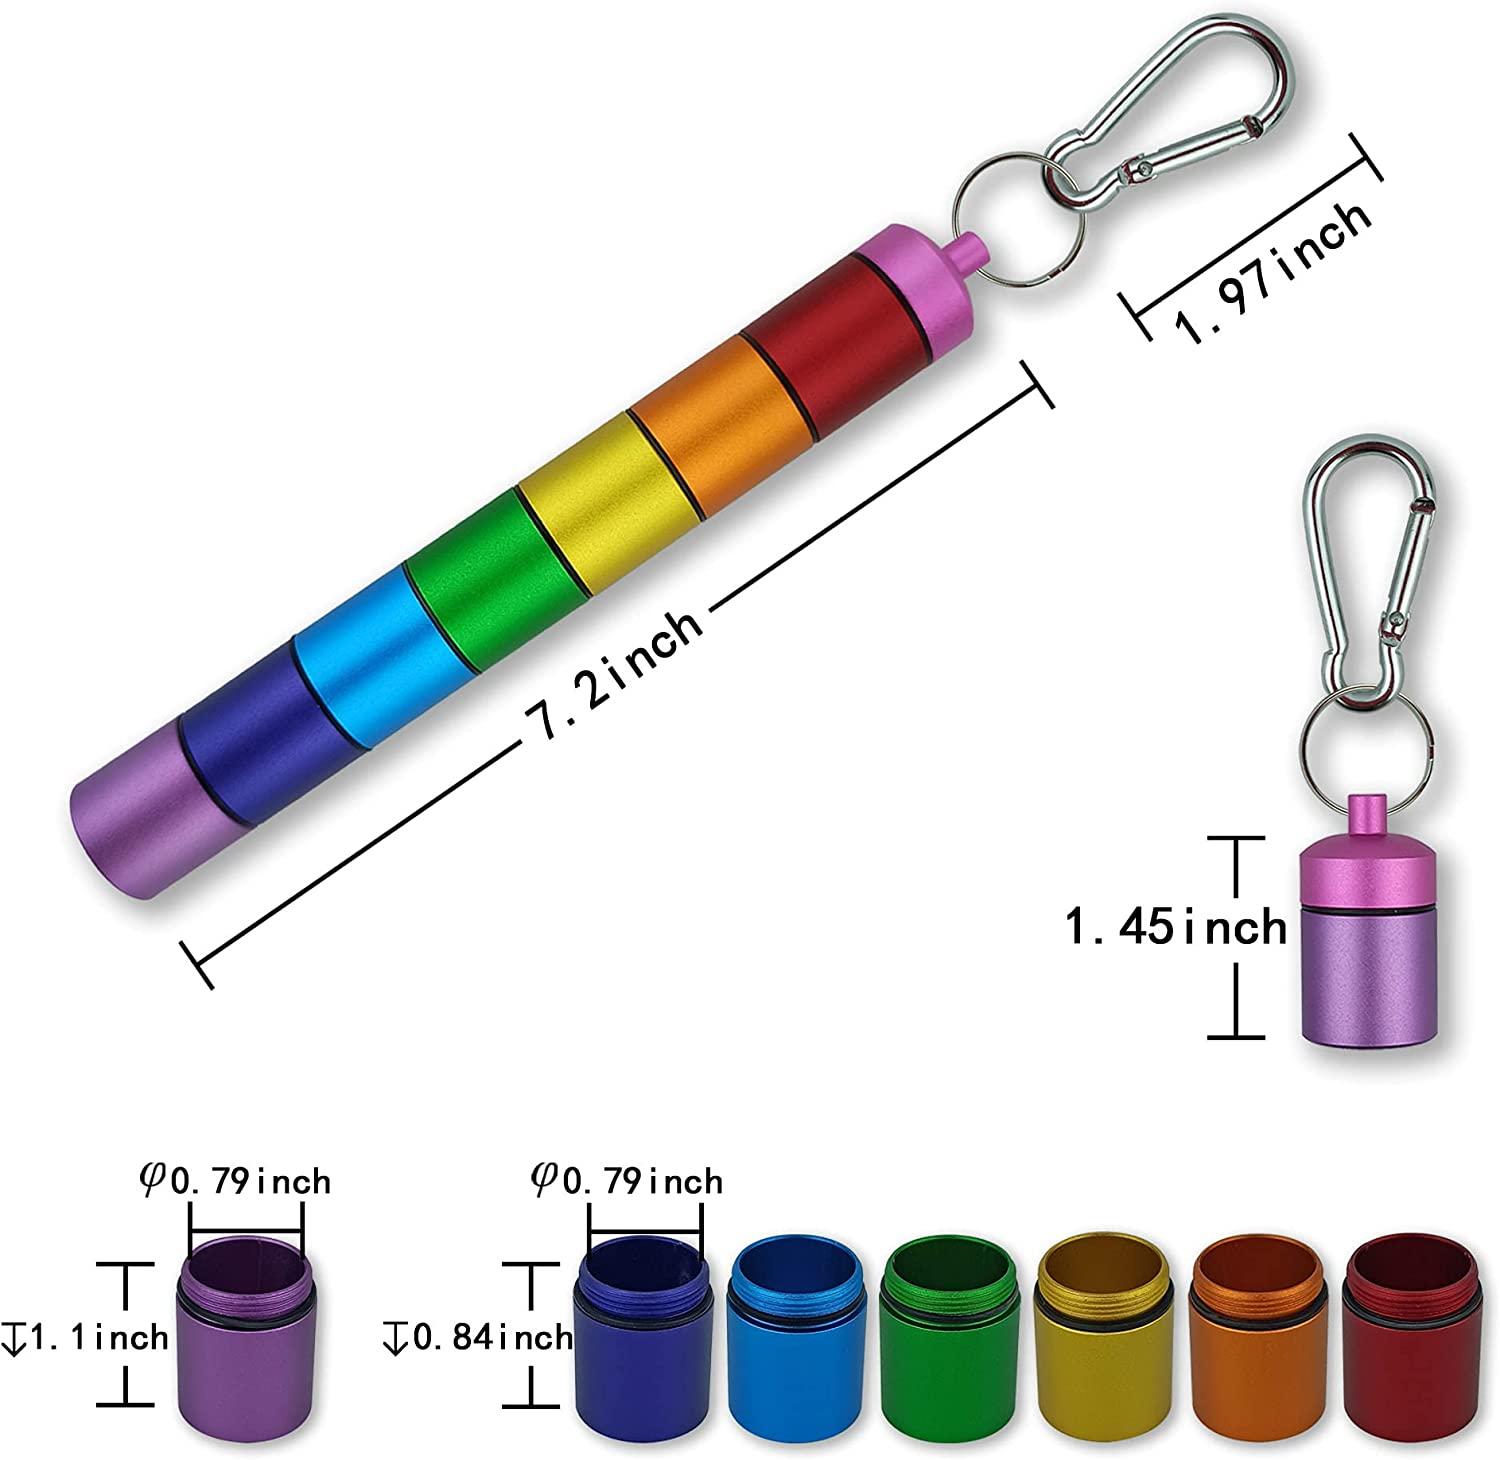 Small Portable Pill case Keychain, Metal Pocket Pill Boxes for